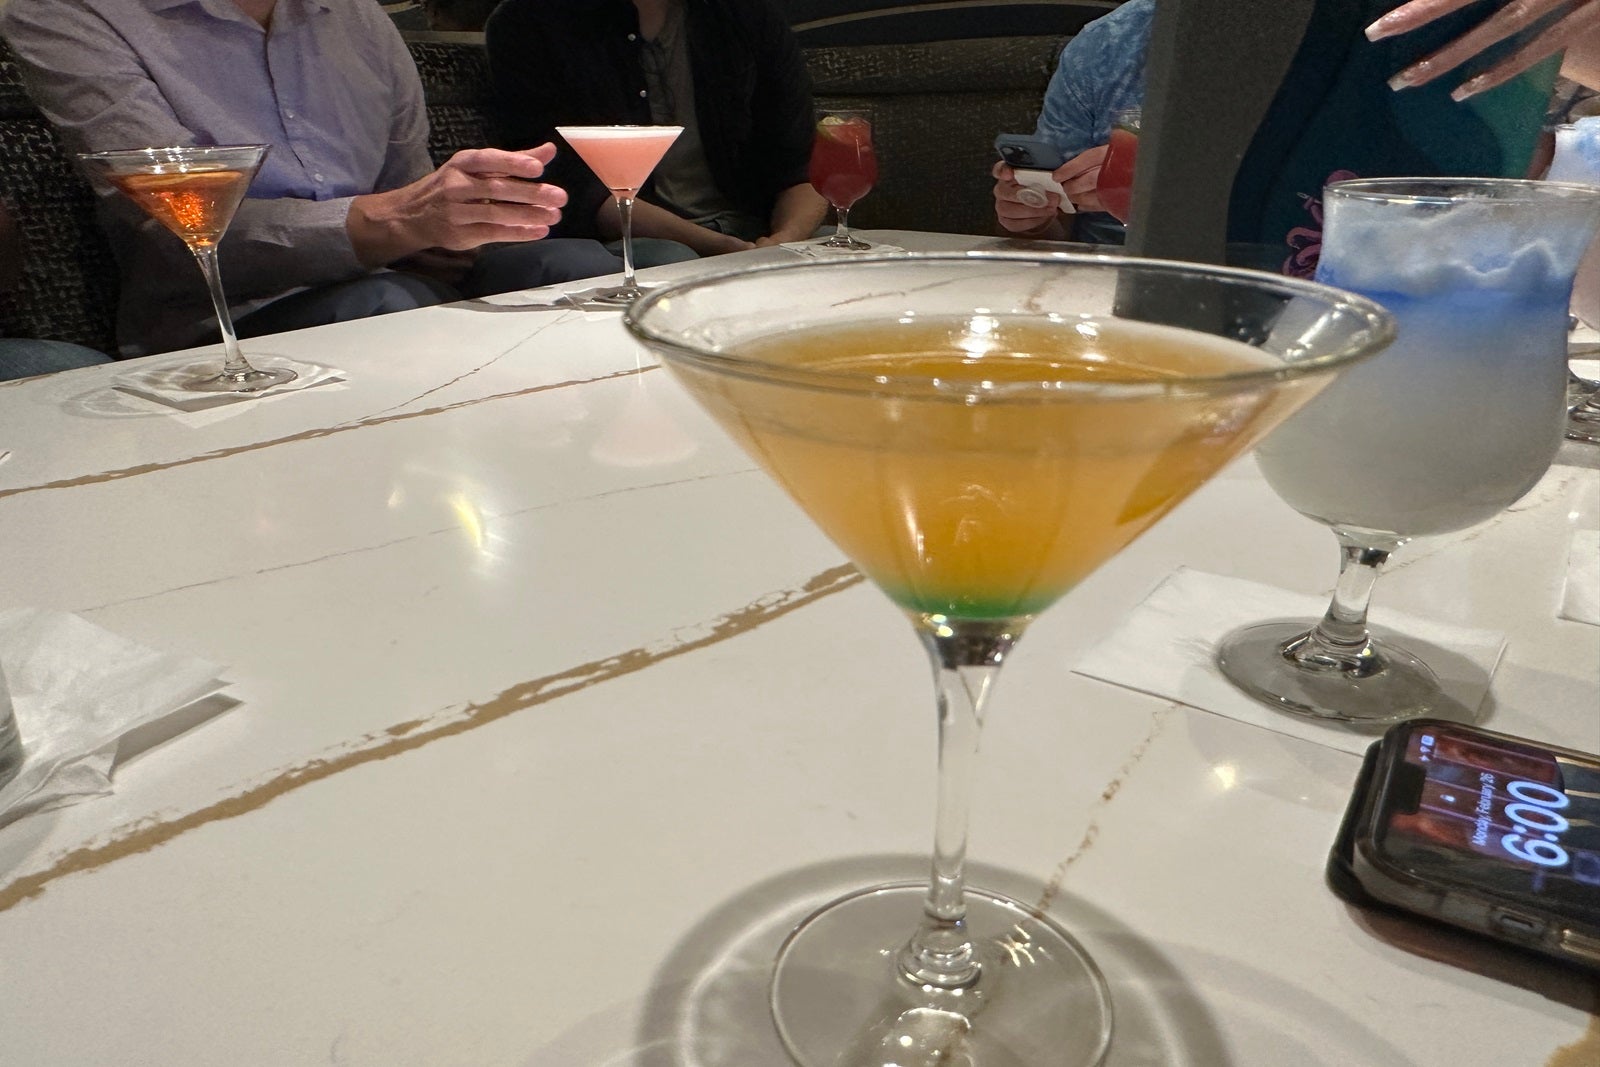 A yellow cocktail in a martini glass